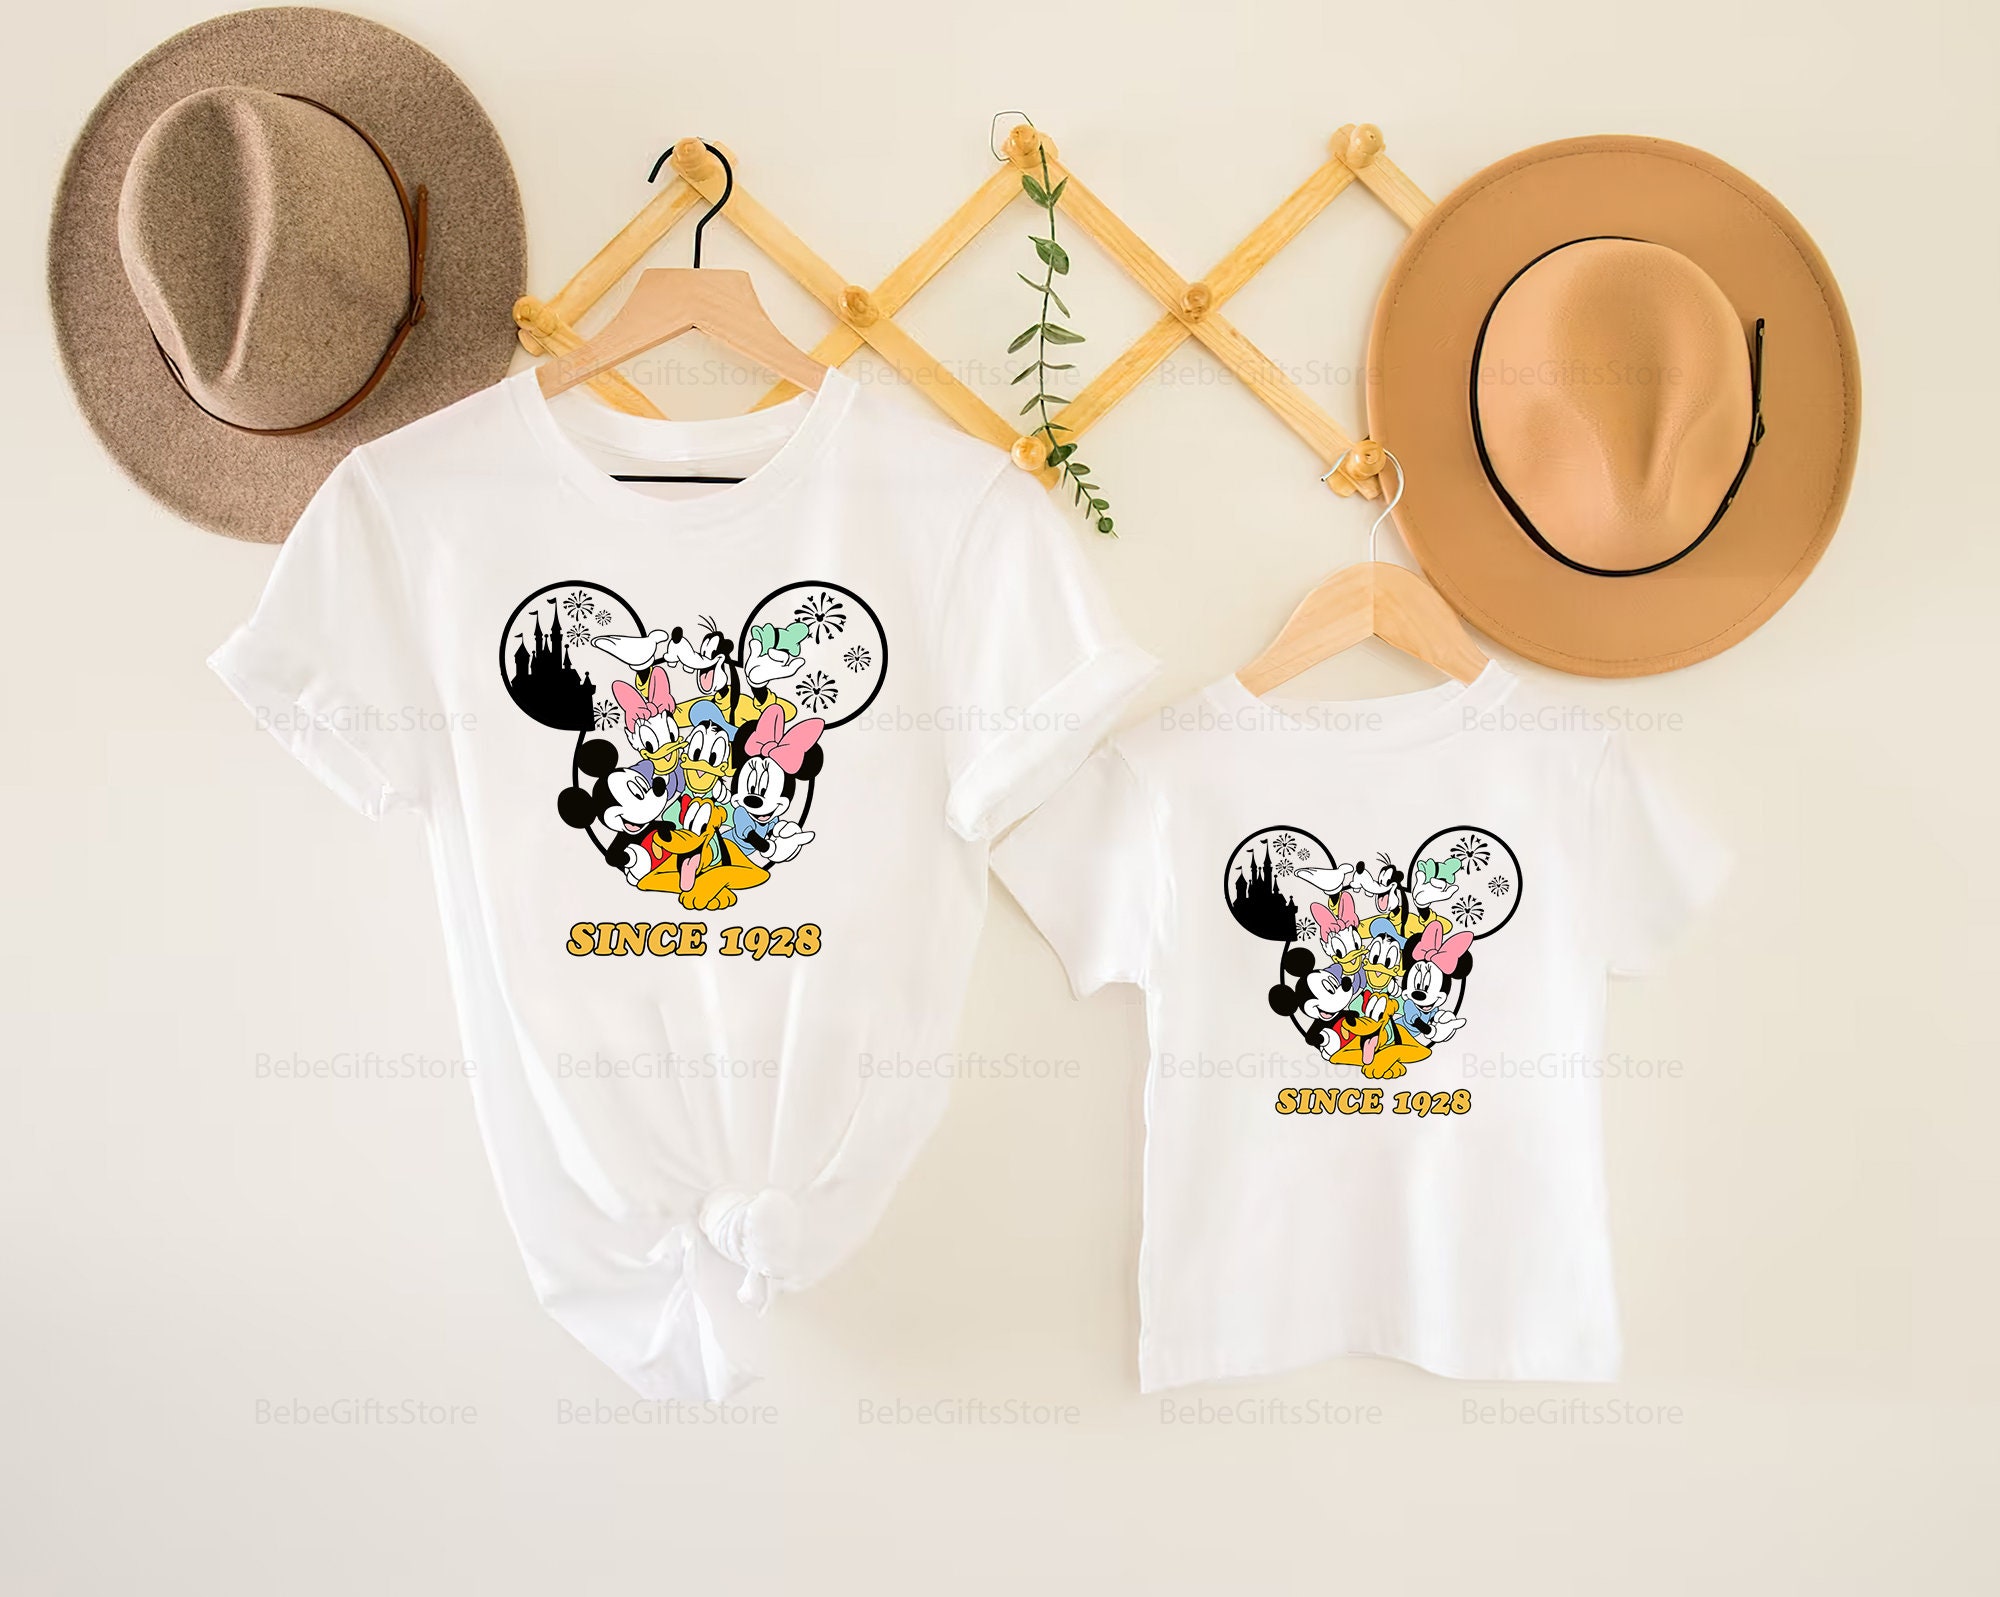 Discover Mouse And Friends Shirt, Mouse Est 1928 Shirt, Family Vacation Shirt, Disney Mickey Shirt, Family Mickey Shirt, Mickey Halloween Shirt